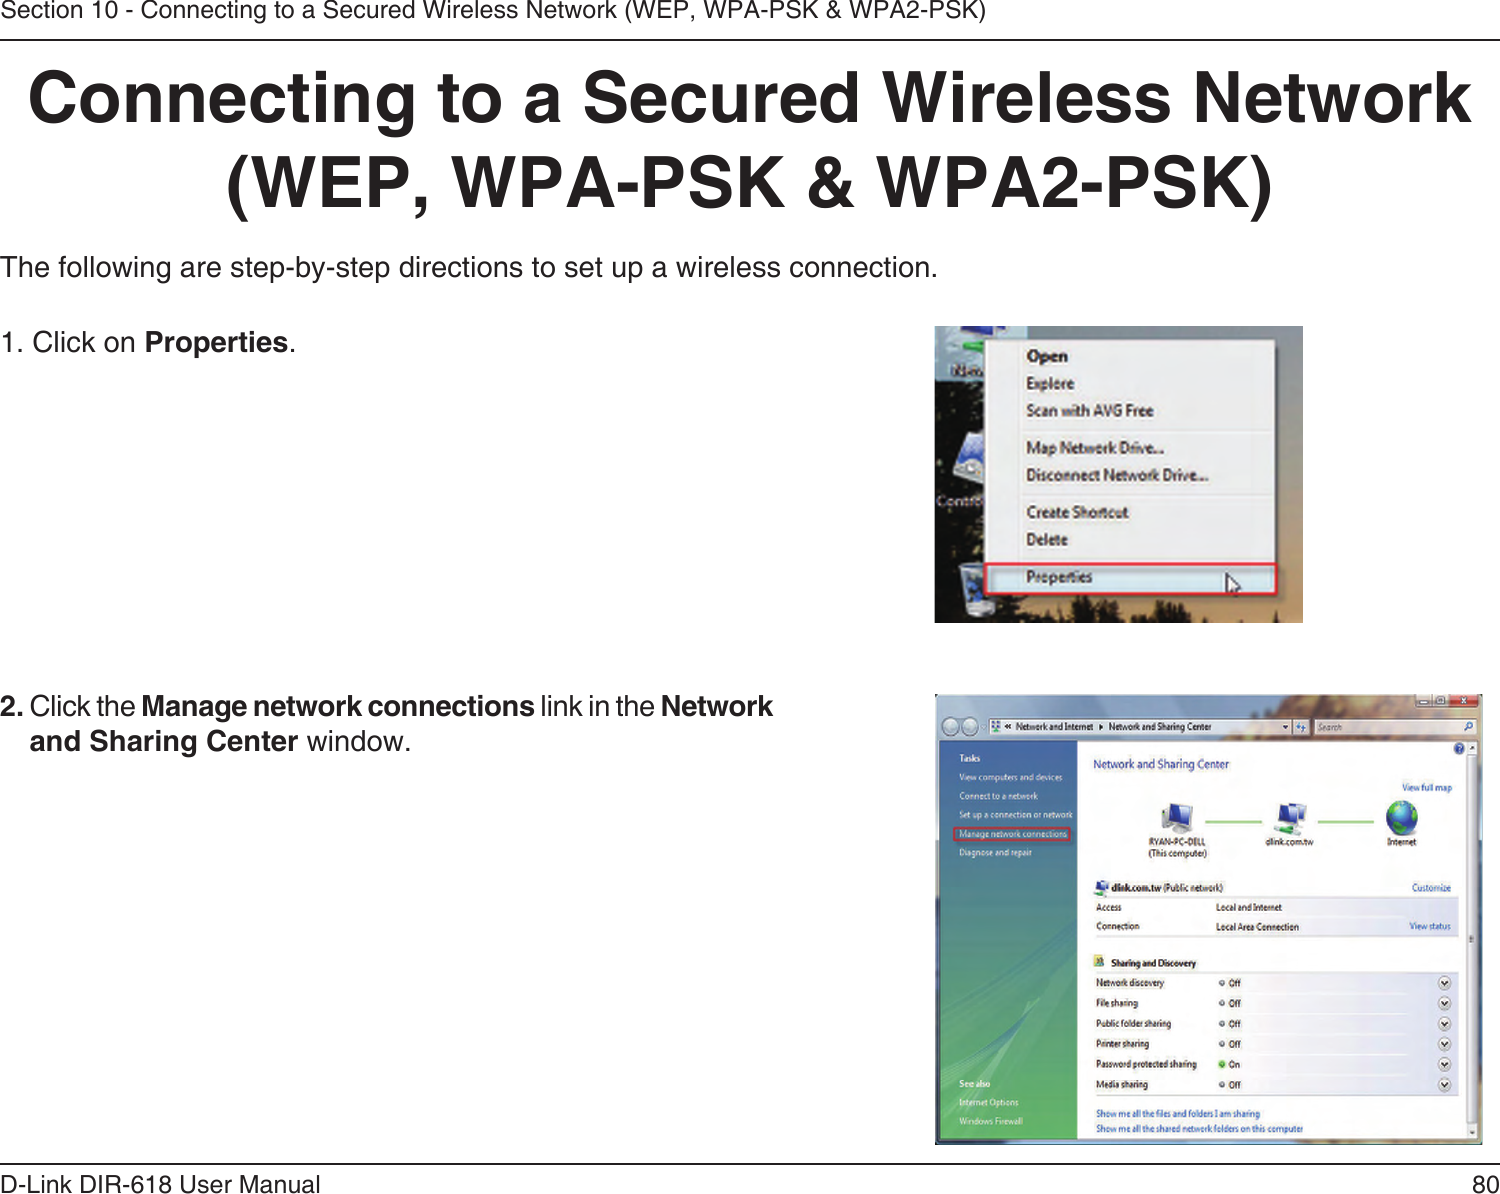 80D-Link DIR-618 User ManualSection 10 - Connecting to a Secured Wireless Network (WEP, WPA-PSK &amp; WPA2-PSK)Connecting to a Secured Wireless Network (WEP, WPA-PSK &amp; WPA2-PSK)The following are step-by-step directions to set up a wireless connection.2. Click the Manage network connections link in the Network and Sharing Center window. 1. Click on Properties.